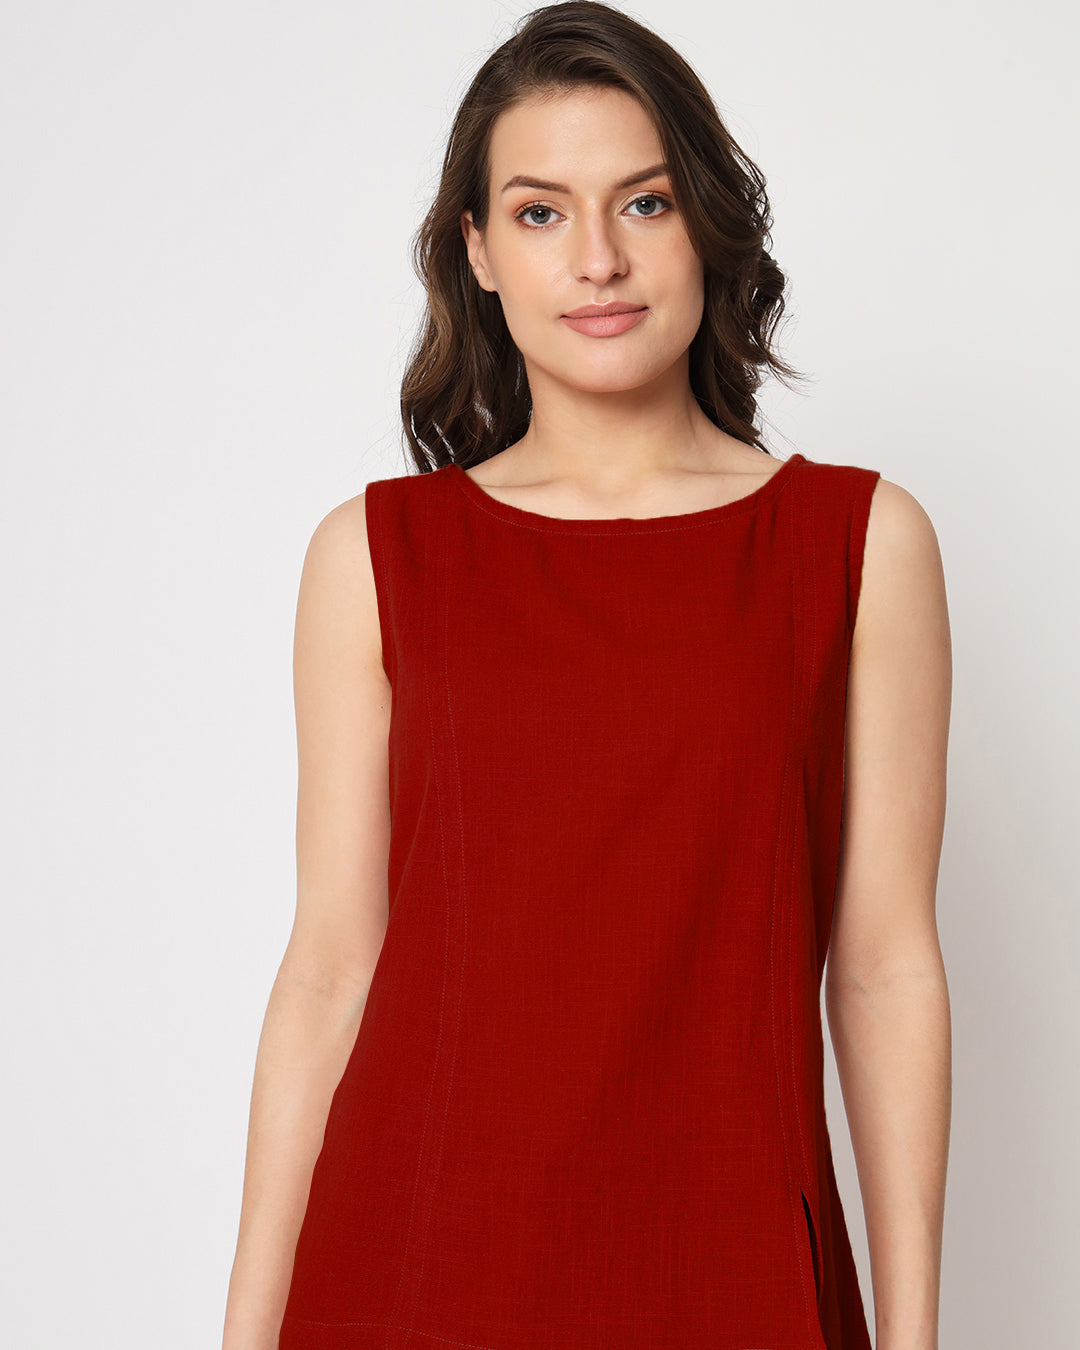 Classic Red Sleeveless Short Length Solid Top (Without Bottoms)